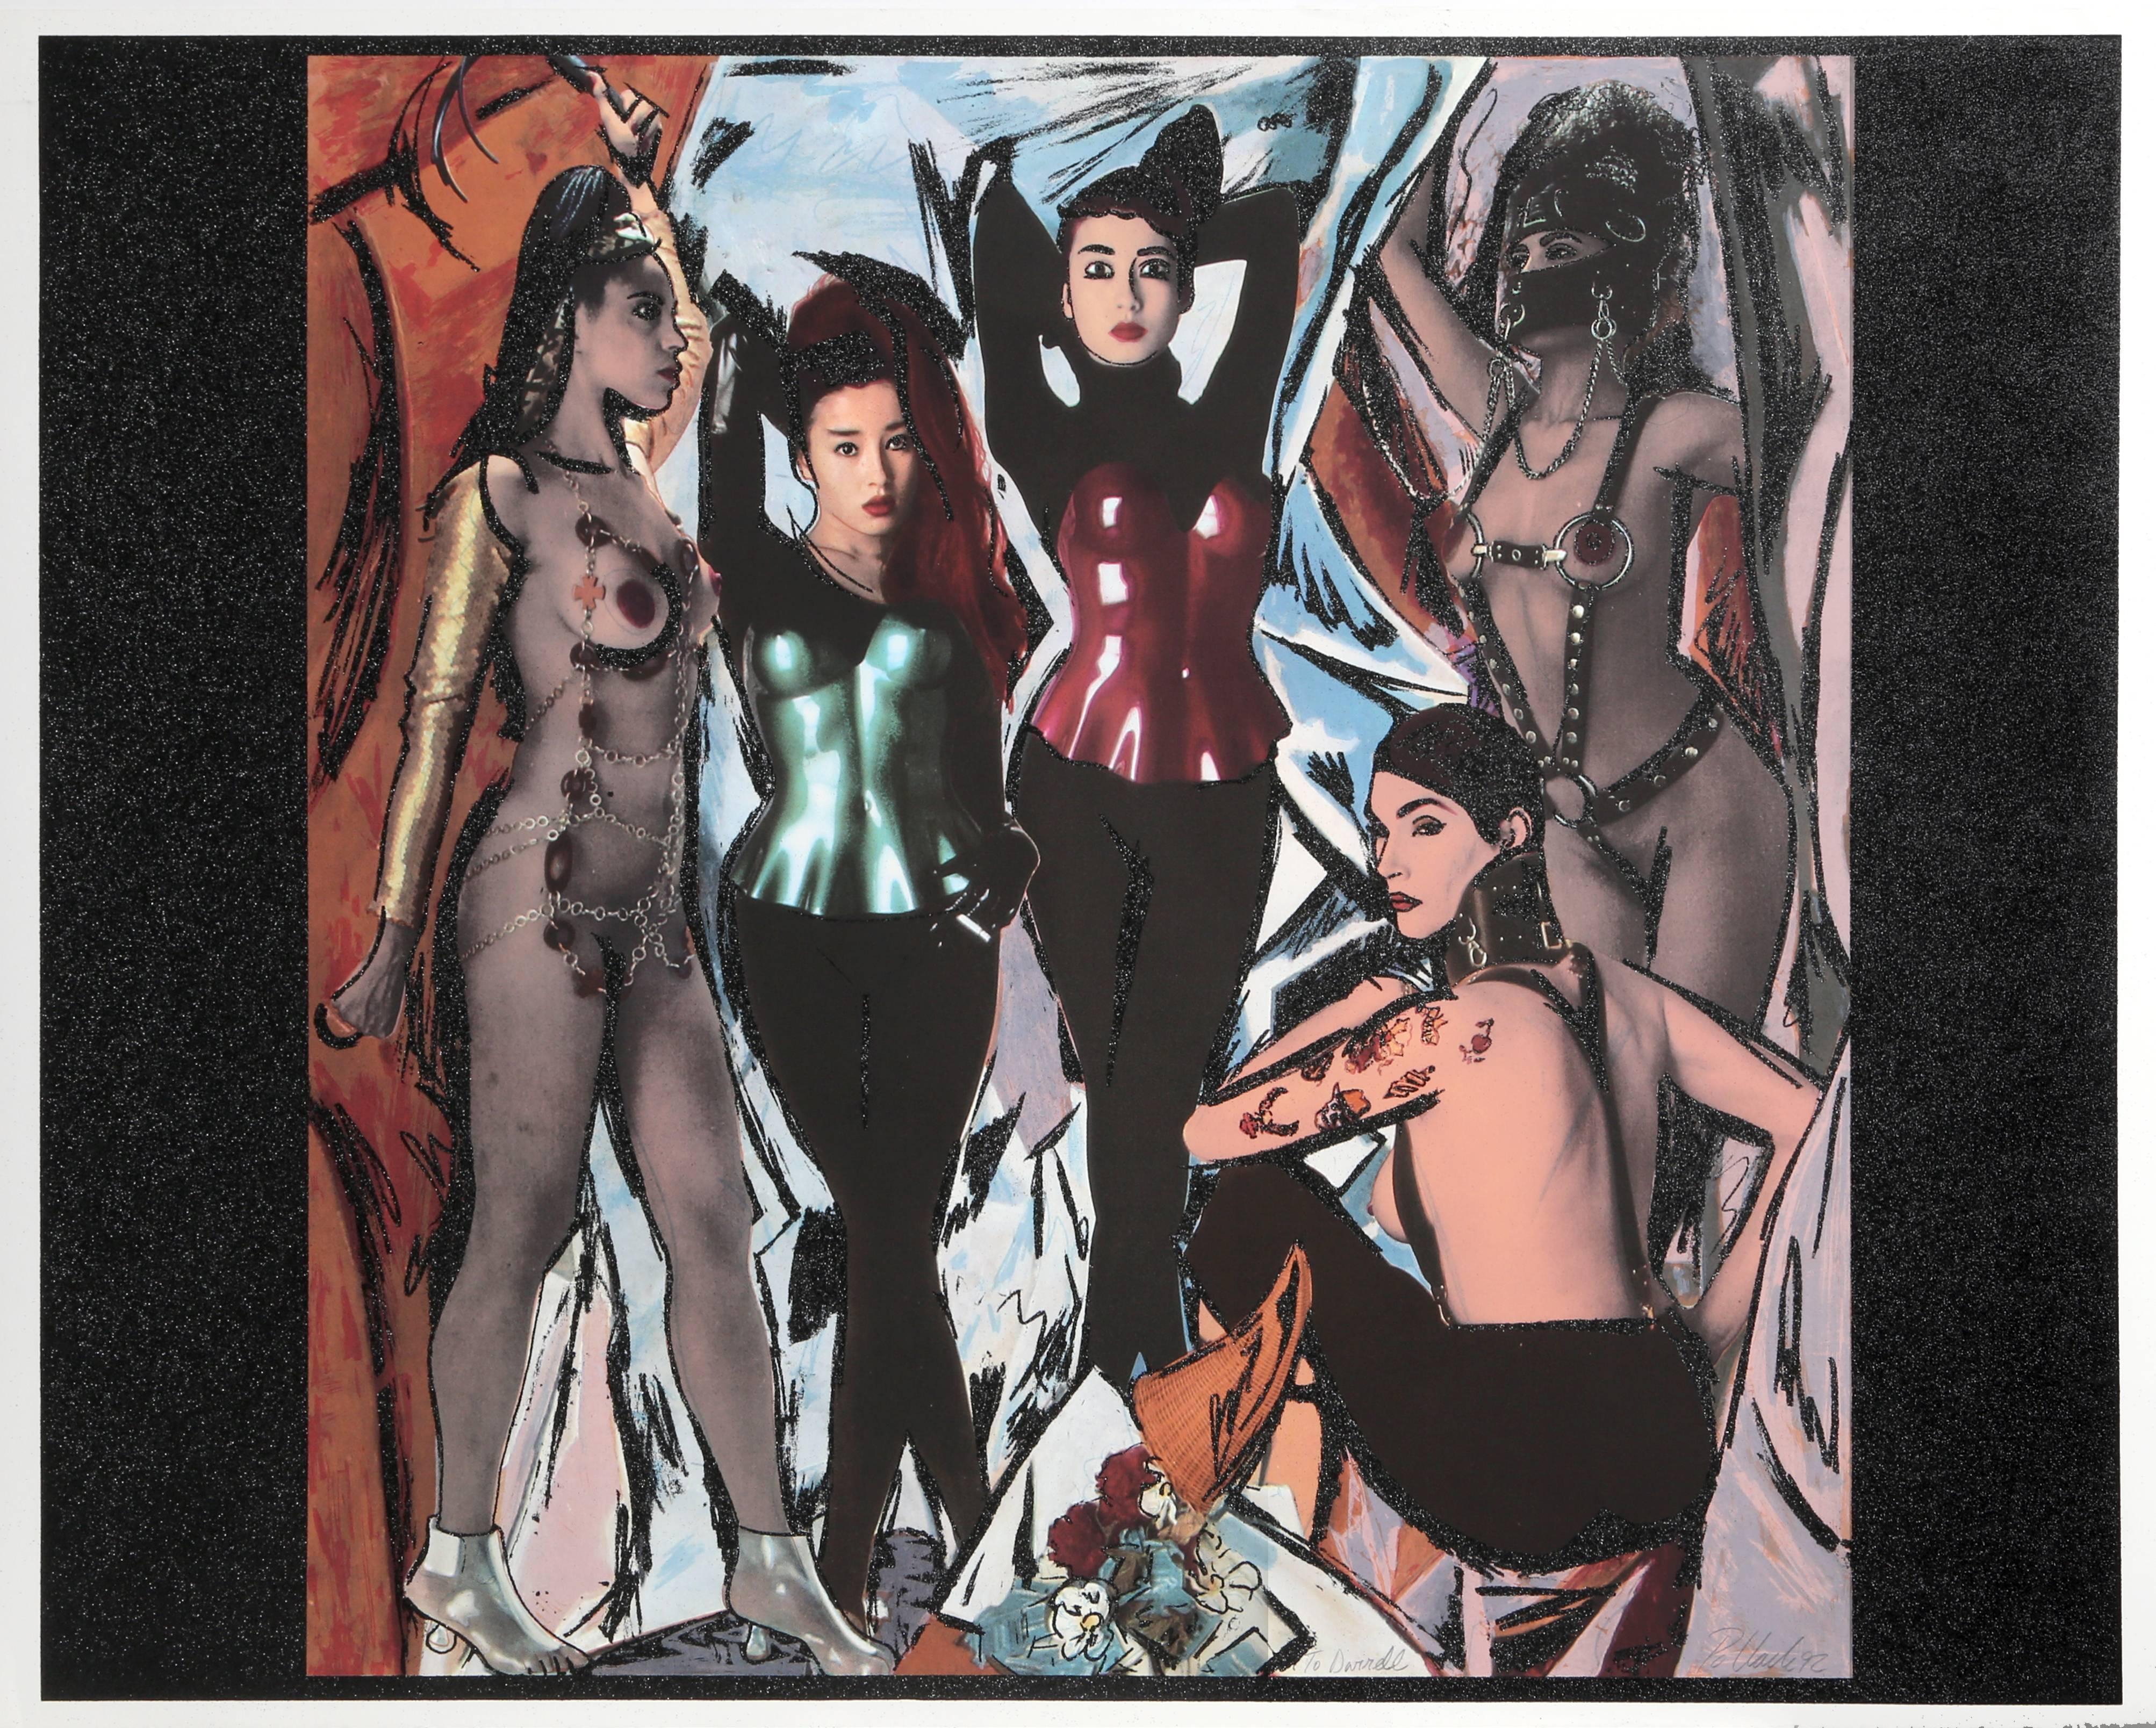 Steven Pollack Nude Print - Rie Miyazawa Les Demoiselles d'Avignon (after Picasso), by Steven Pollac